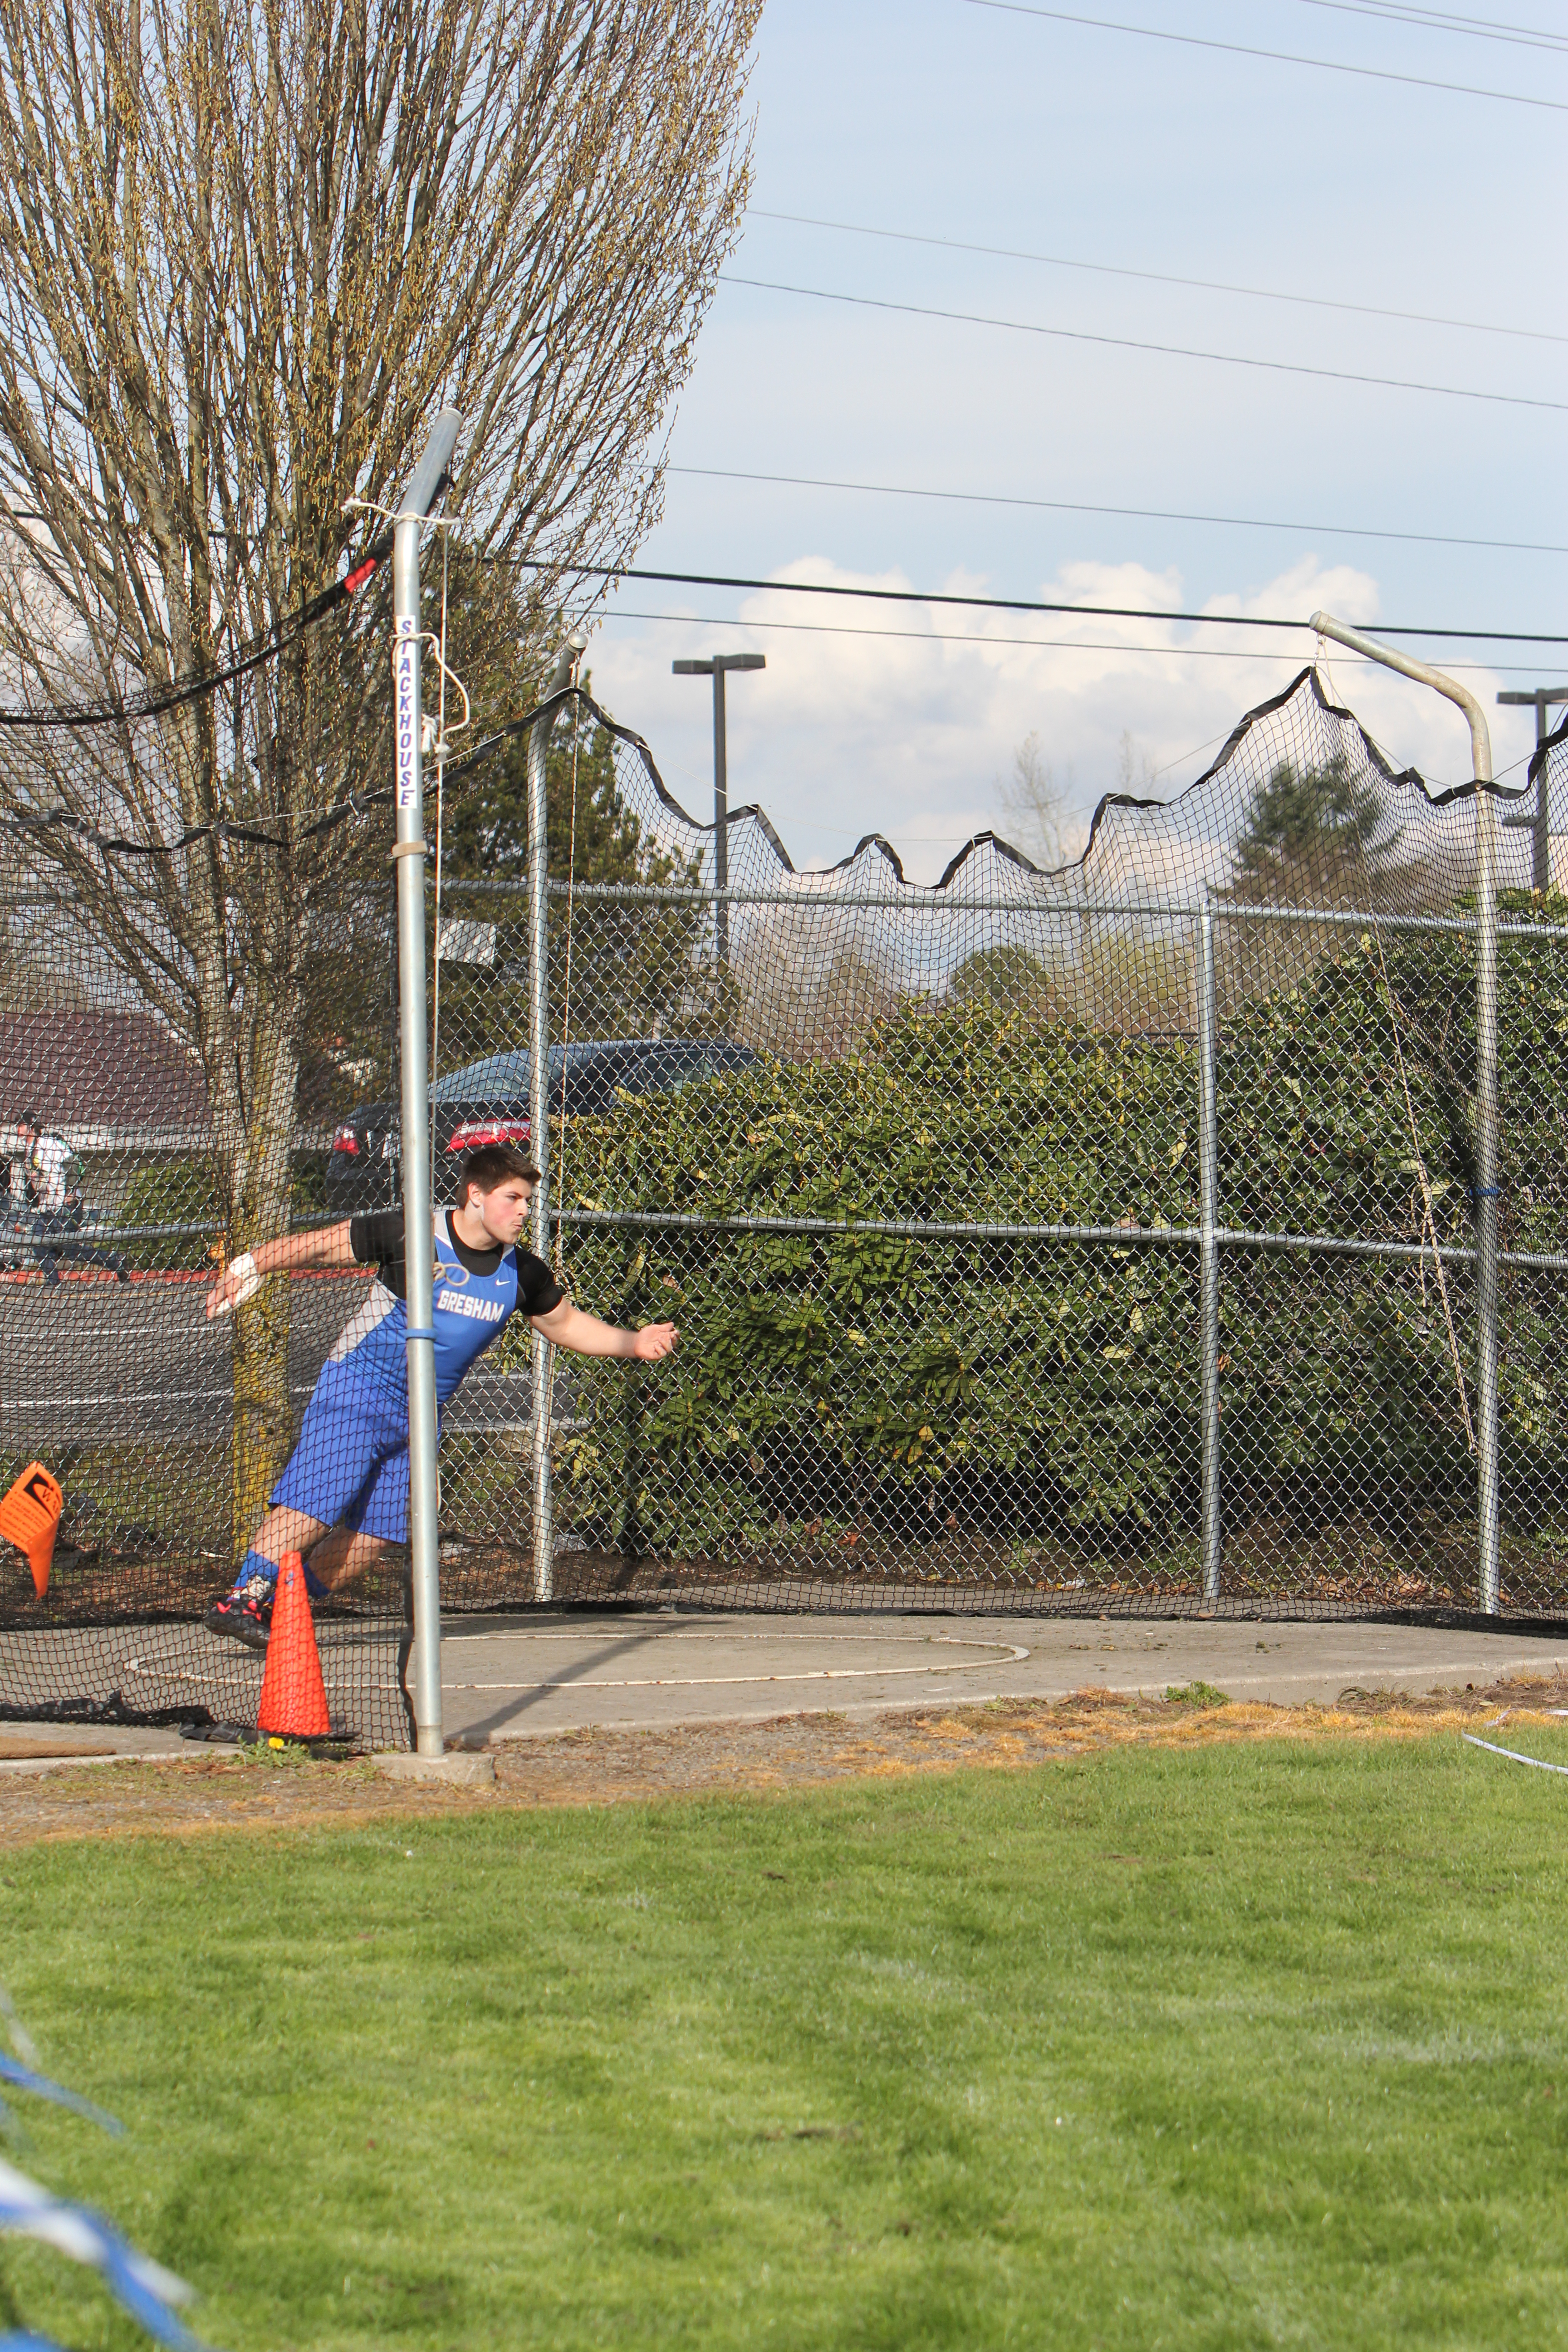 Photo by Teilah Heston Senior Brain Salgado won the men's varsity discus with a throw of 139 feet and 3 inches. Discus was one of two varsity events that saw an all-Gopher sweep.